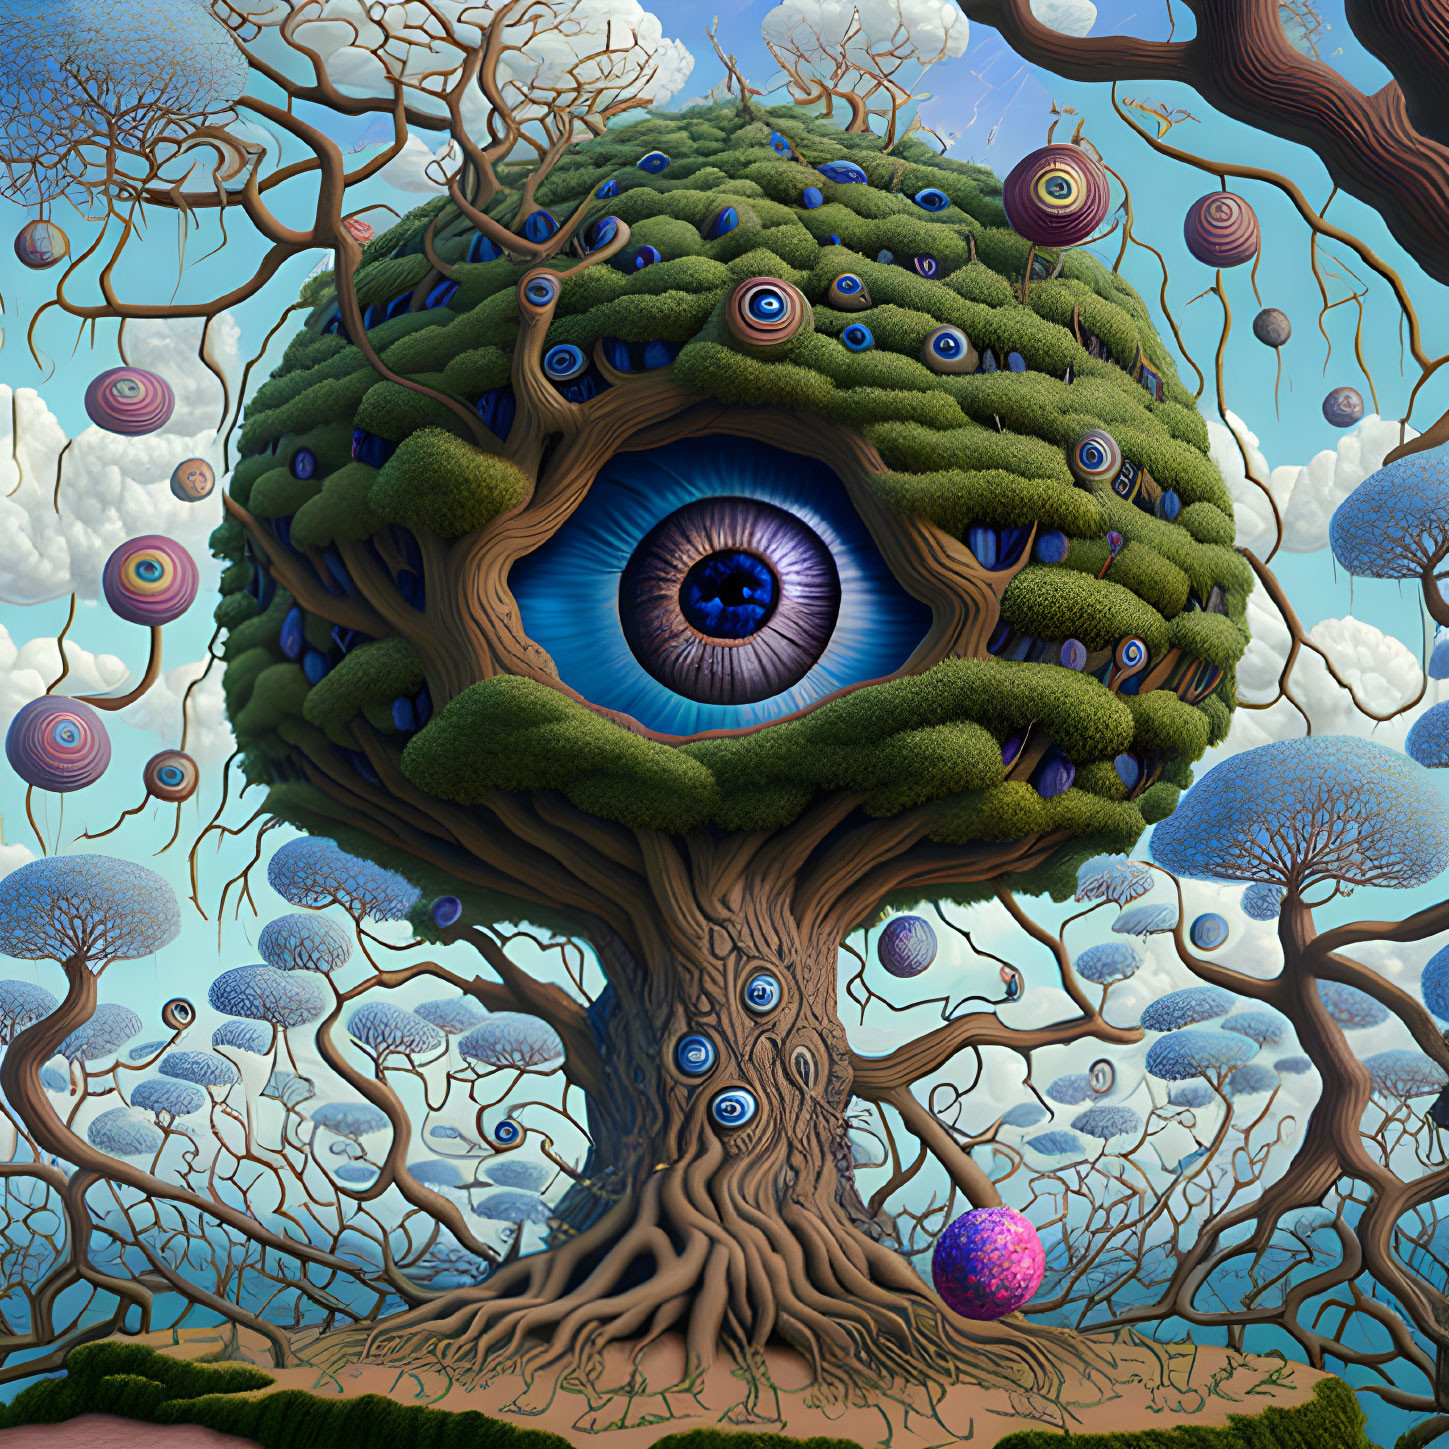 Surreal tree with large eye surrounded by smaller eyes and snails in fantastical forest